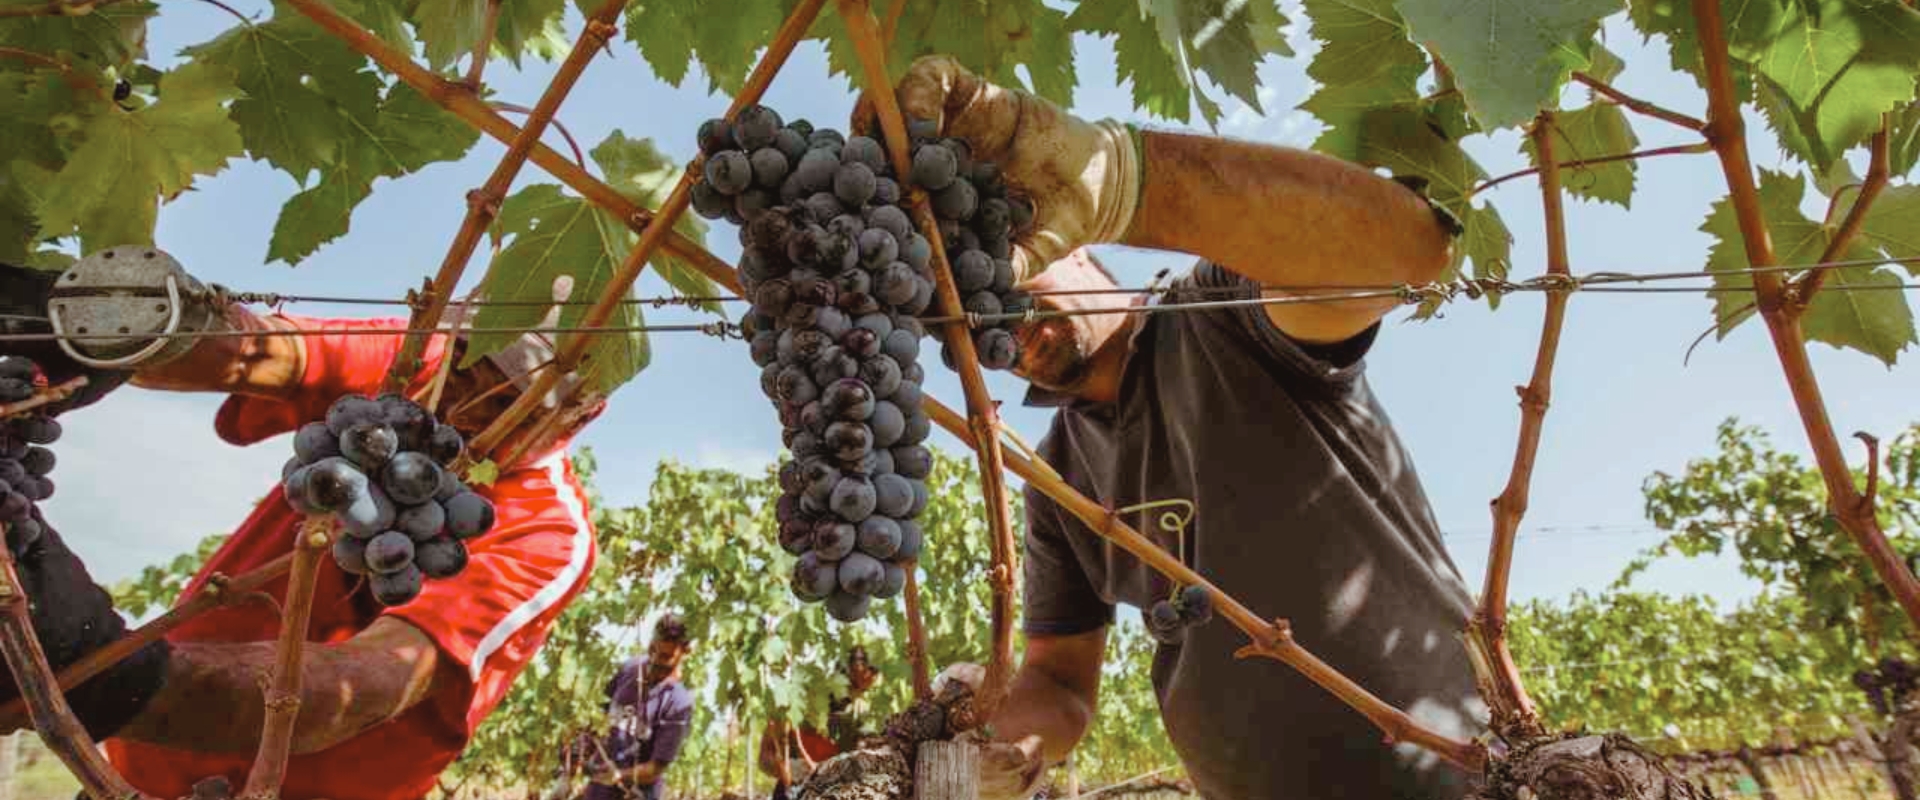 Workers pruning wine grapes in Tuscany